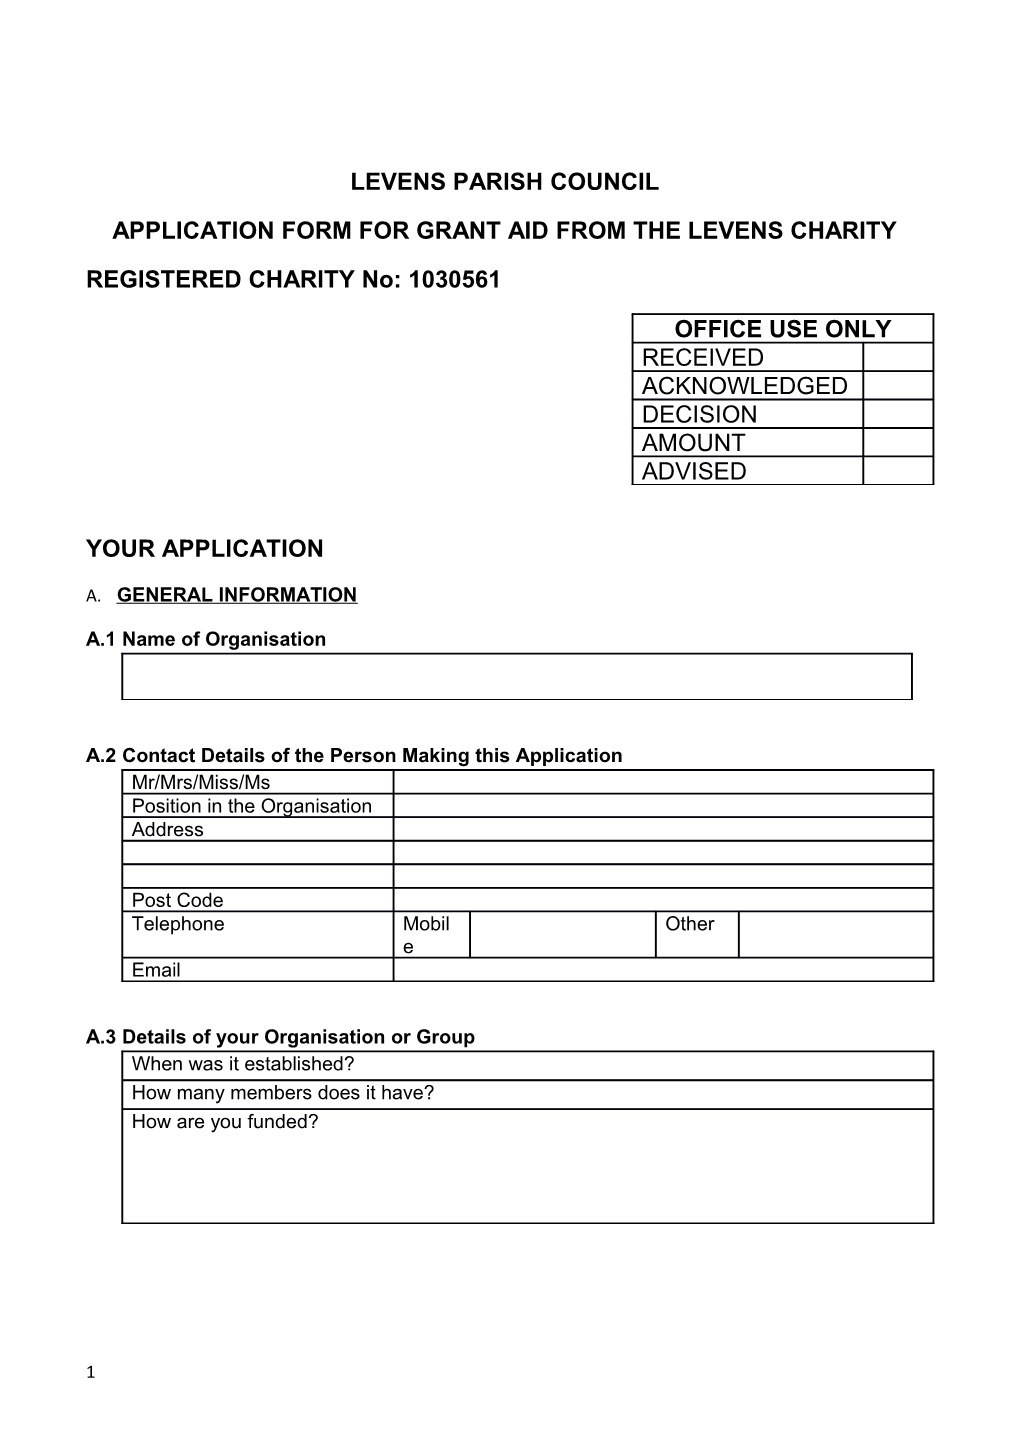 Application Form for Grant Aid from the Levens Charity